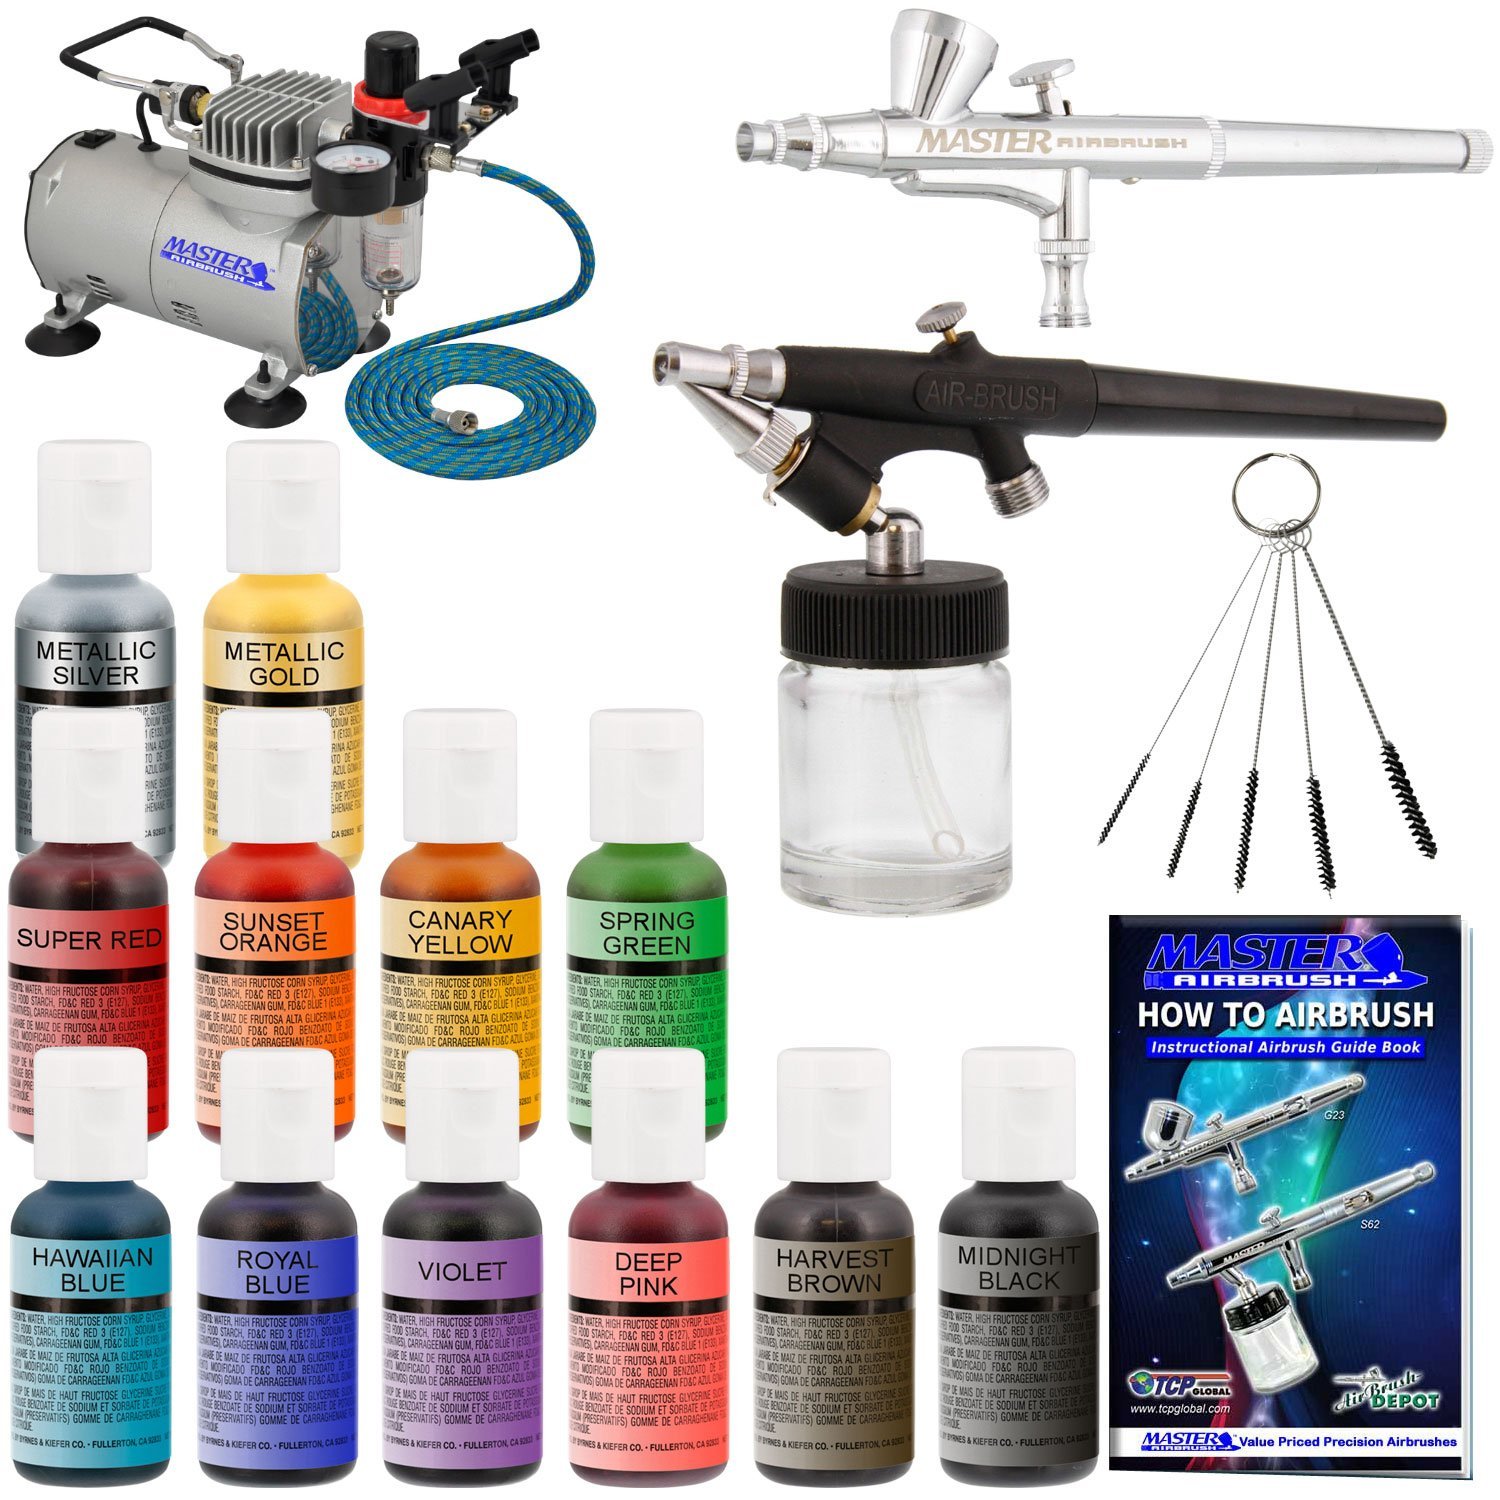 10 Best Airbrush Kits for Cake Decorating » Modern Home Pulse